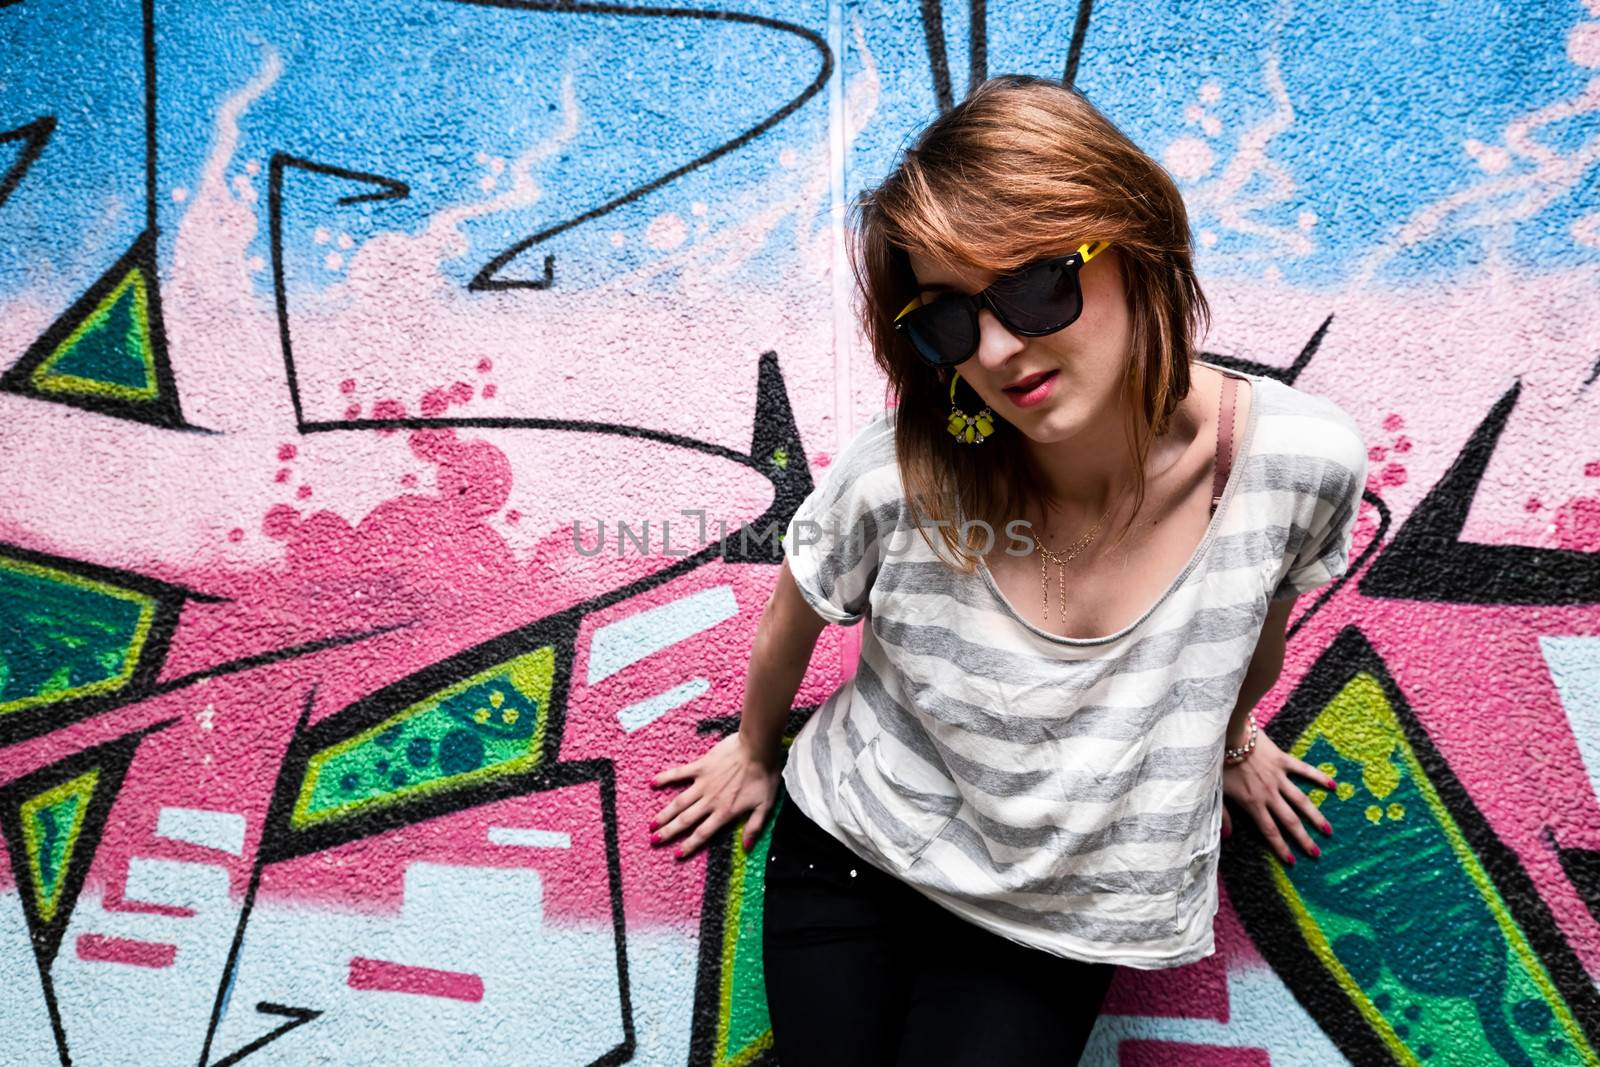 Stylish girl in a dance pose against graffiti wall by photocreo